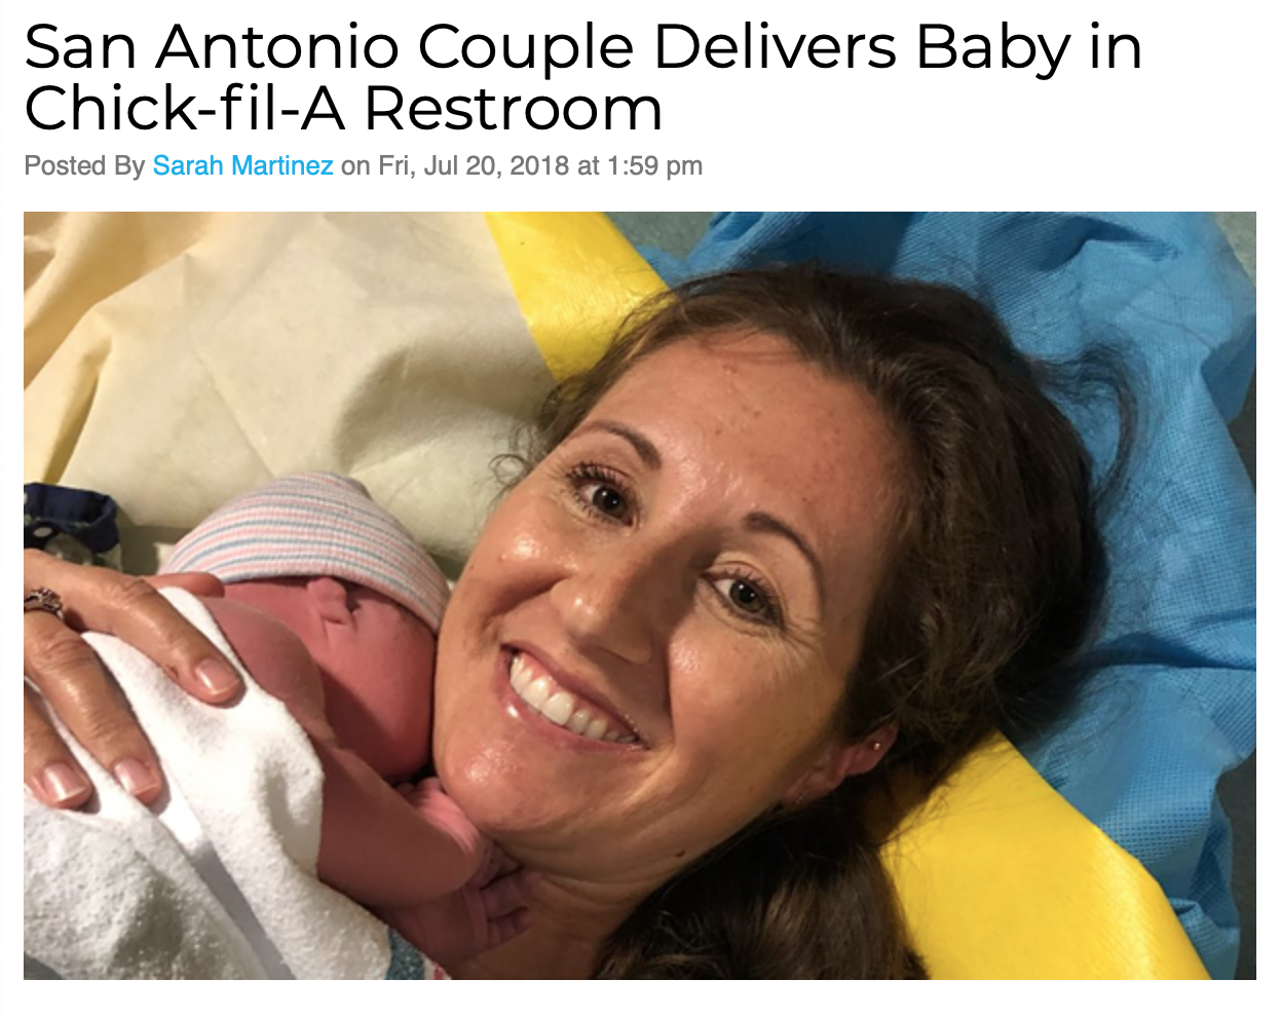 She thought she had to use the restroom. Instead she gave birth. Read more.